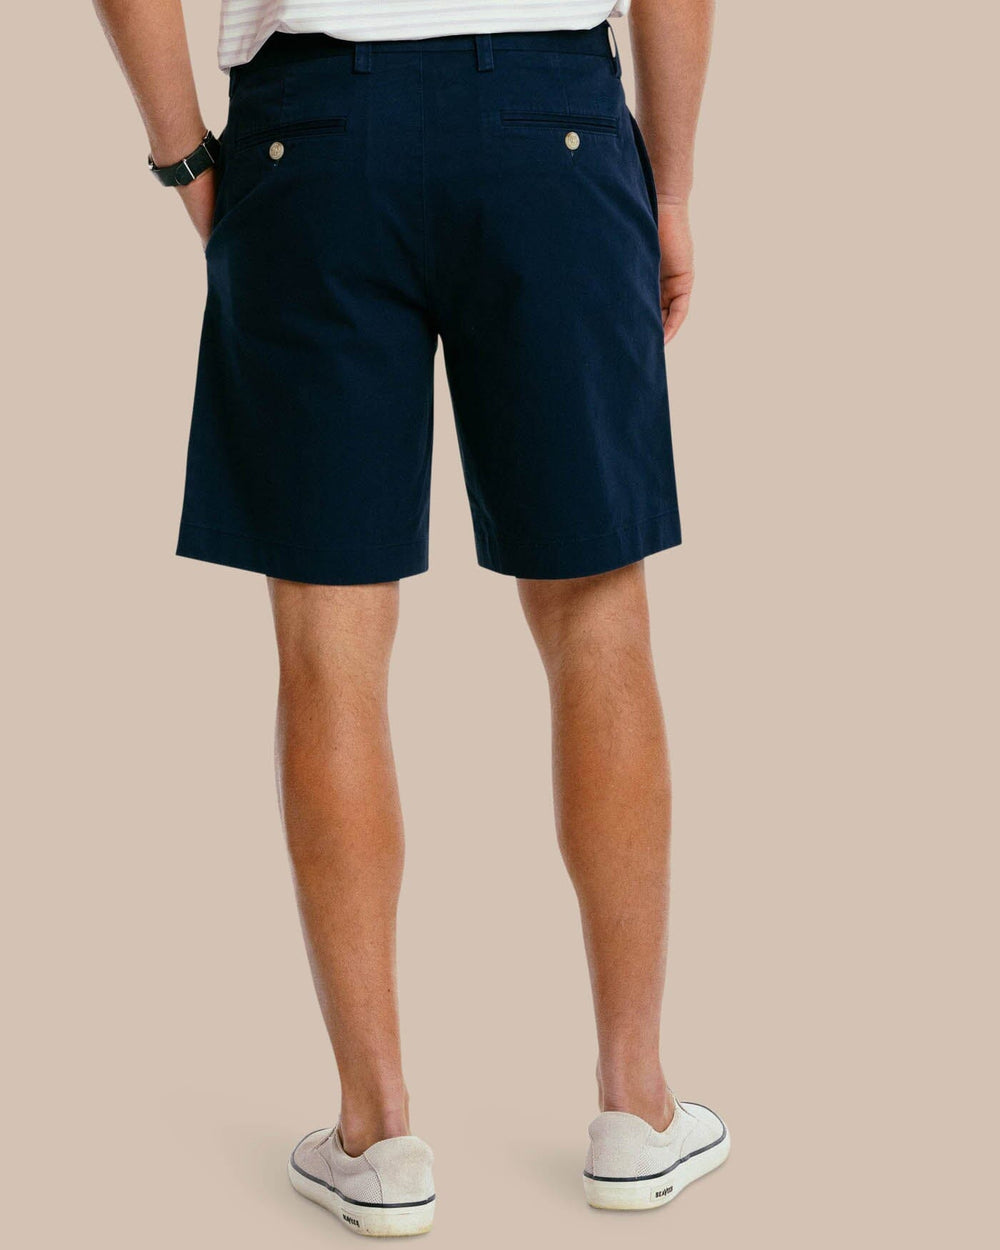 The back view of the Men's New Channel Marker 9 Inch Short by Southern Tide - True Navy